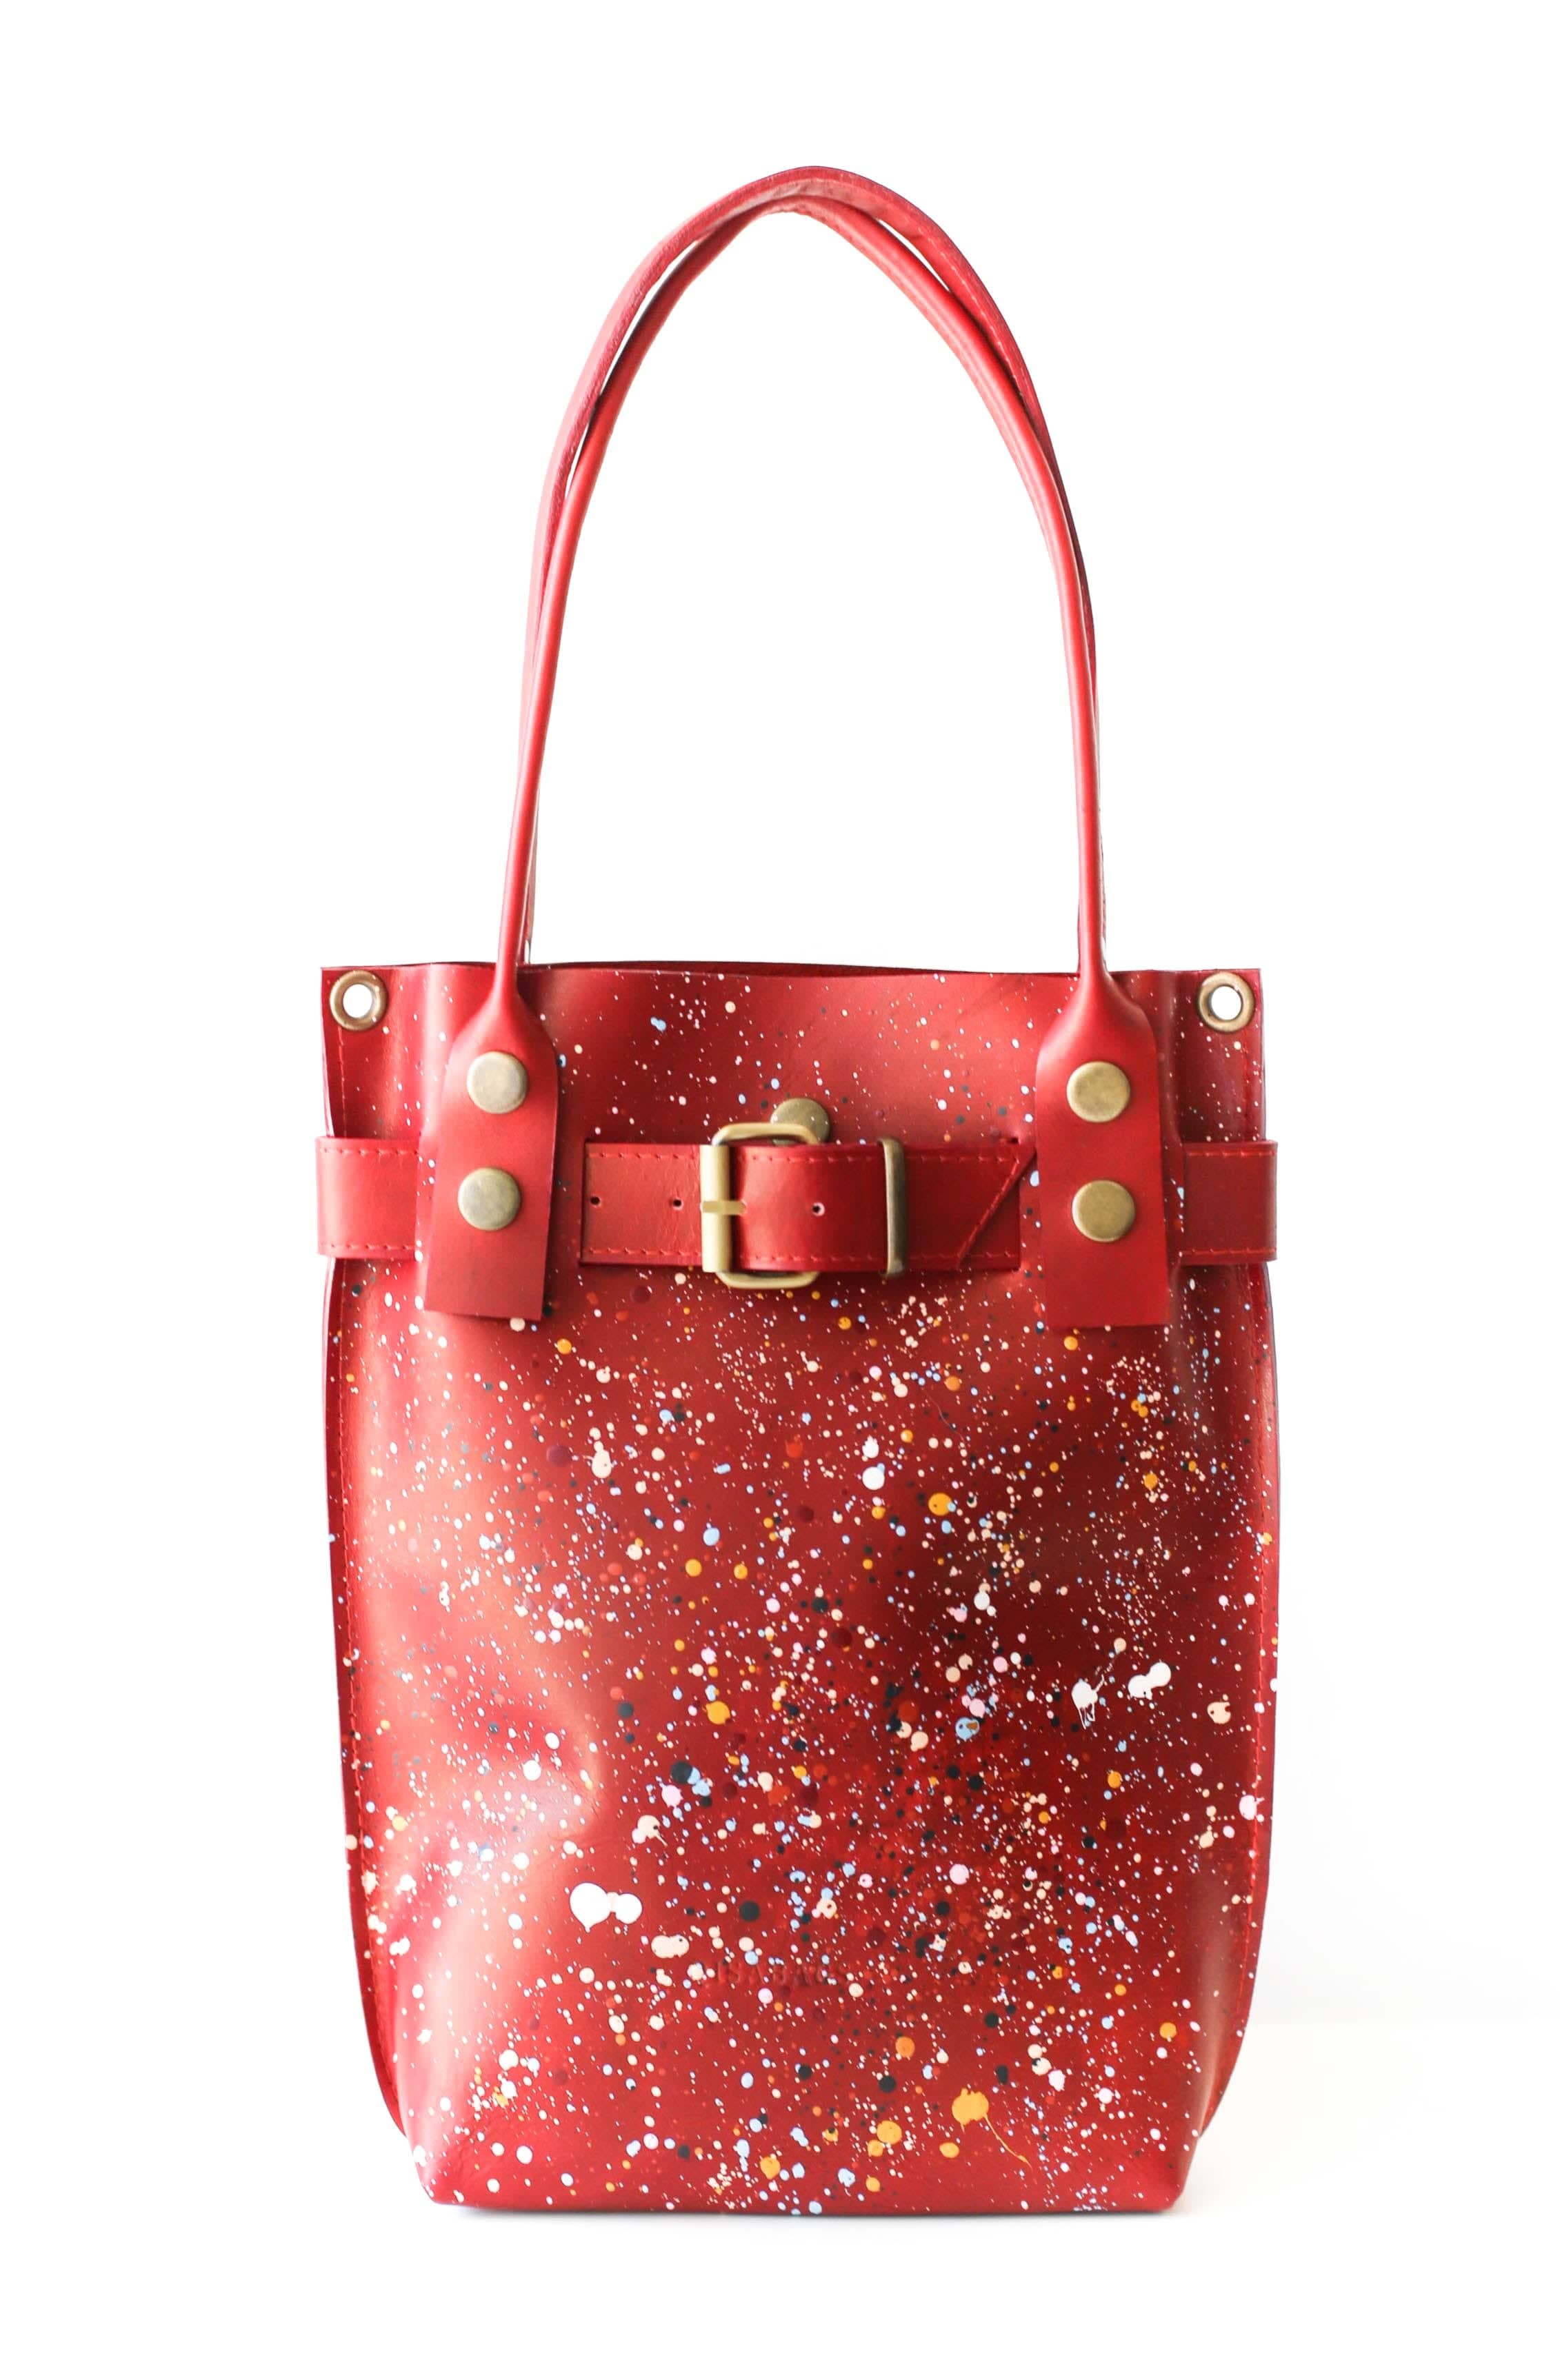 Luxury Designer Red Heart Red Shoulder Bag For Women Top Quality Tote,  Crossbody, Evening Case, And Card Handbag From Basicbag, $79.28 | DHgate.Com